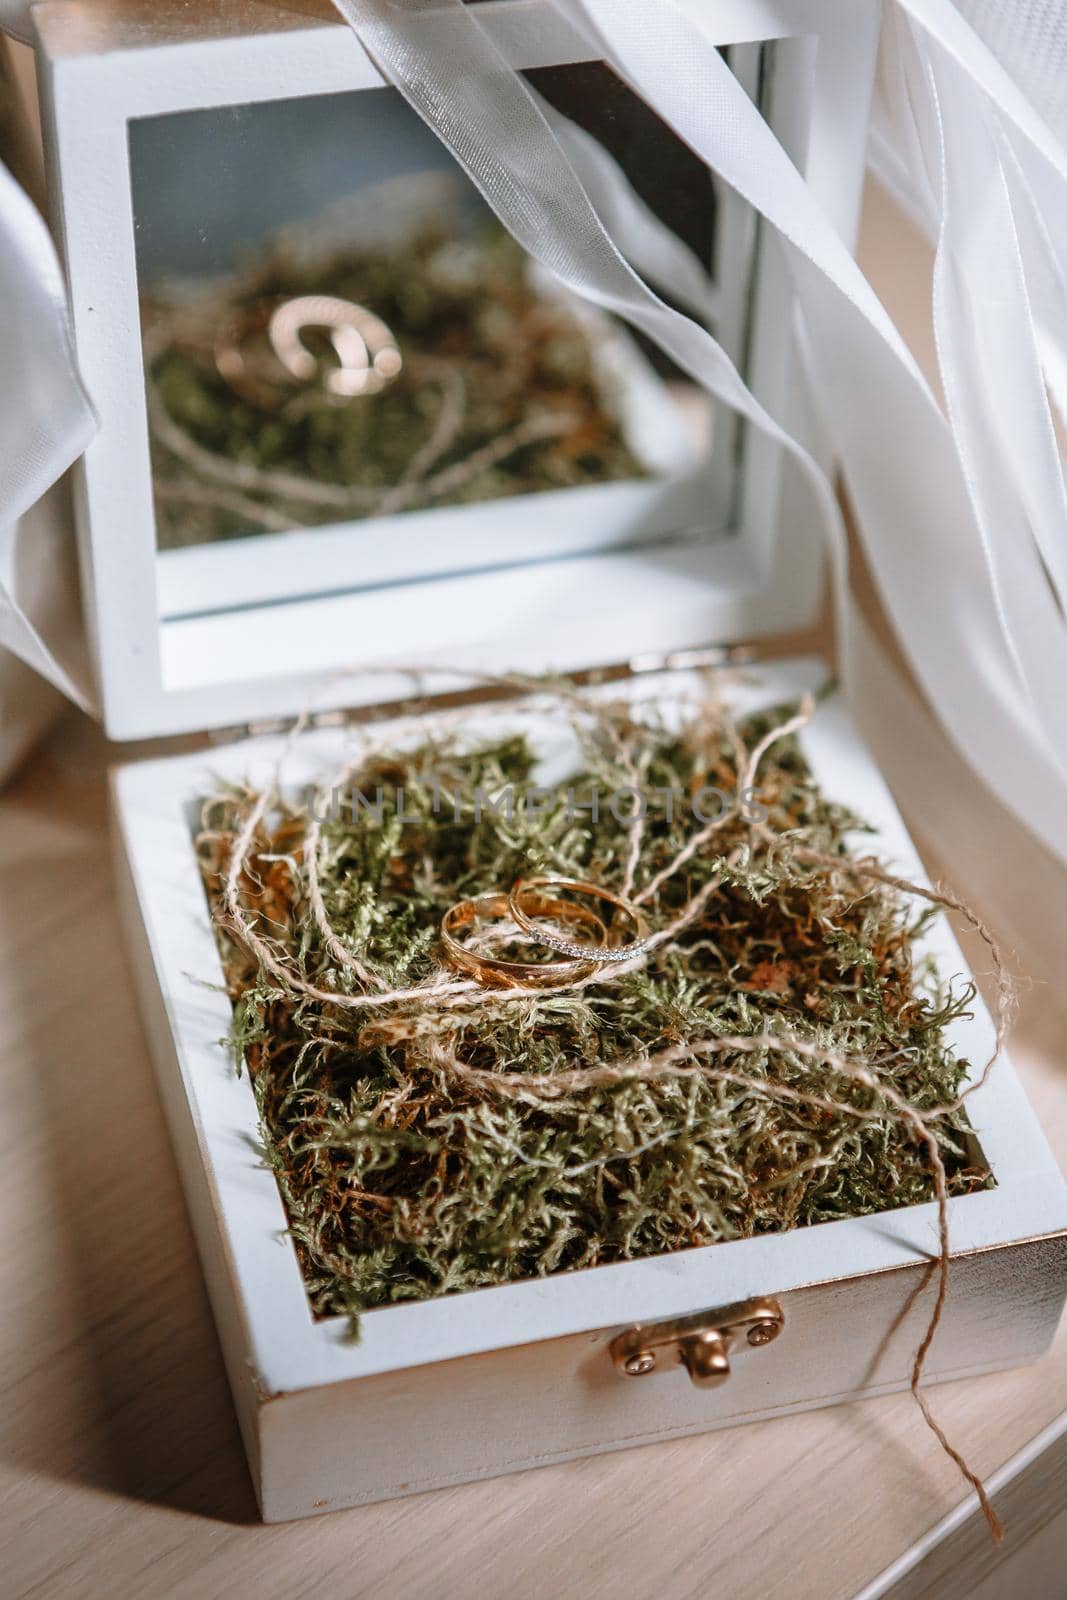 Gold wedding rings lying in a handmade wooden box by deandy